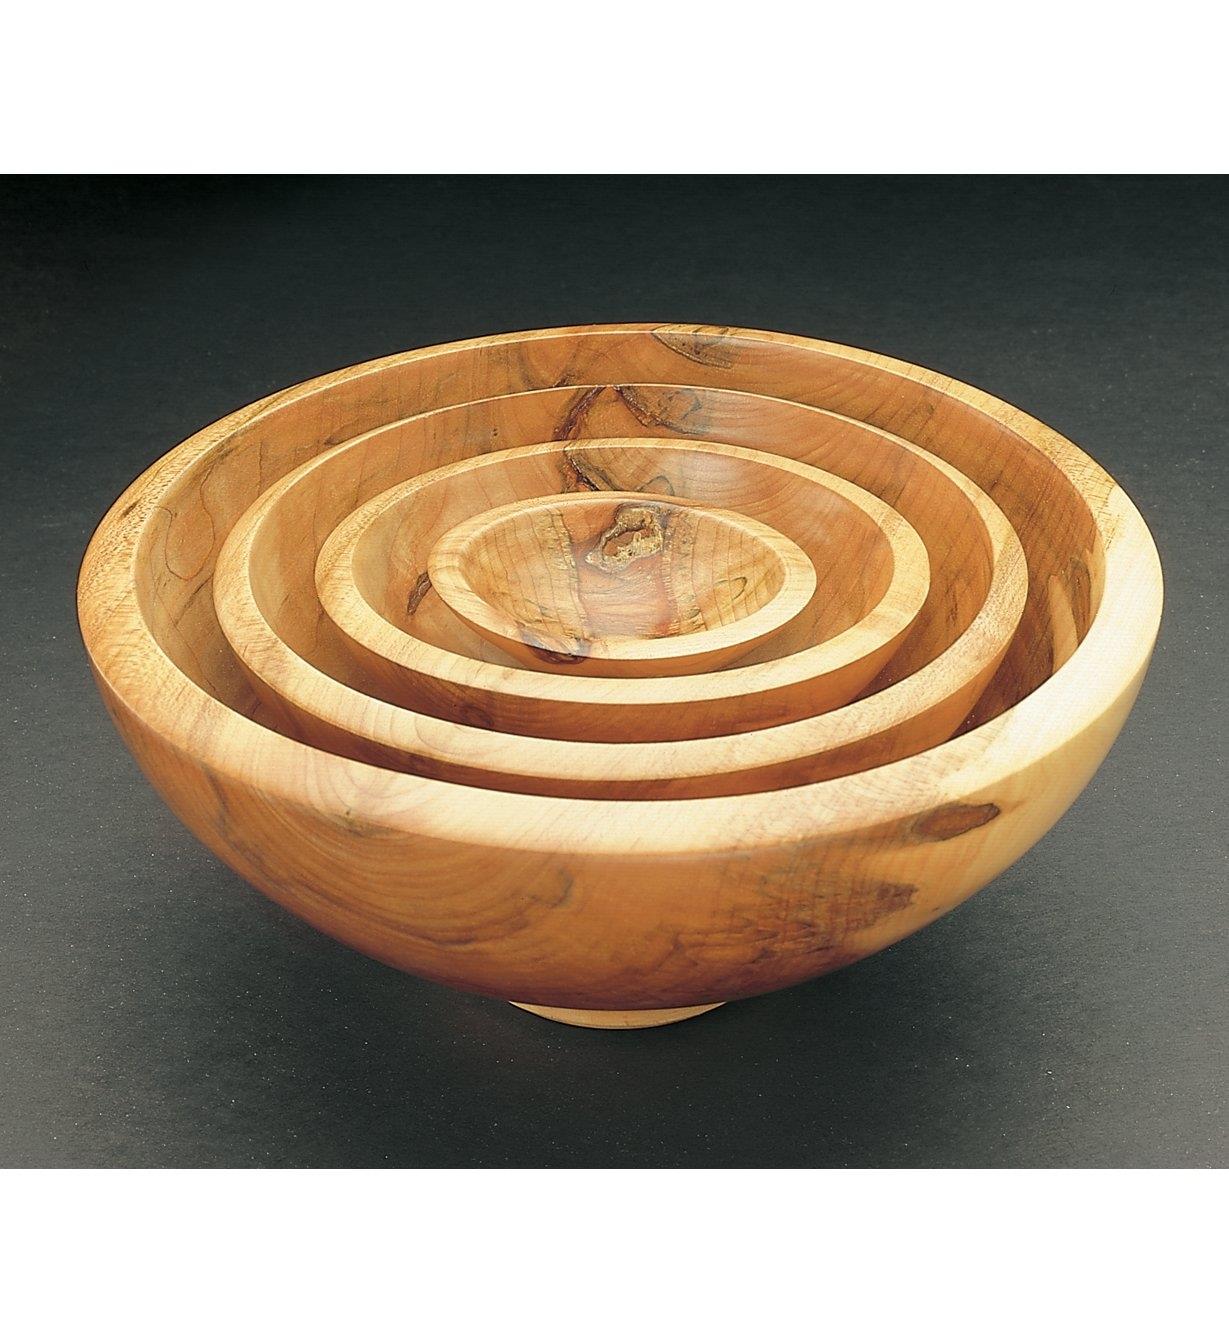 Example of four nesting bowls made with the center-saver system